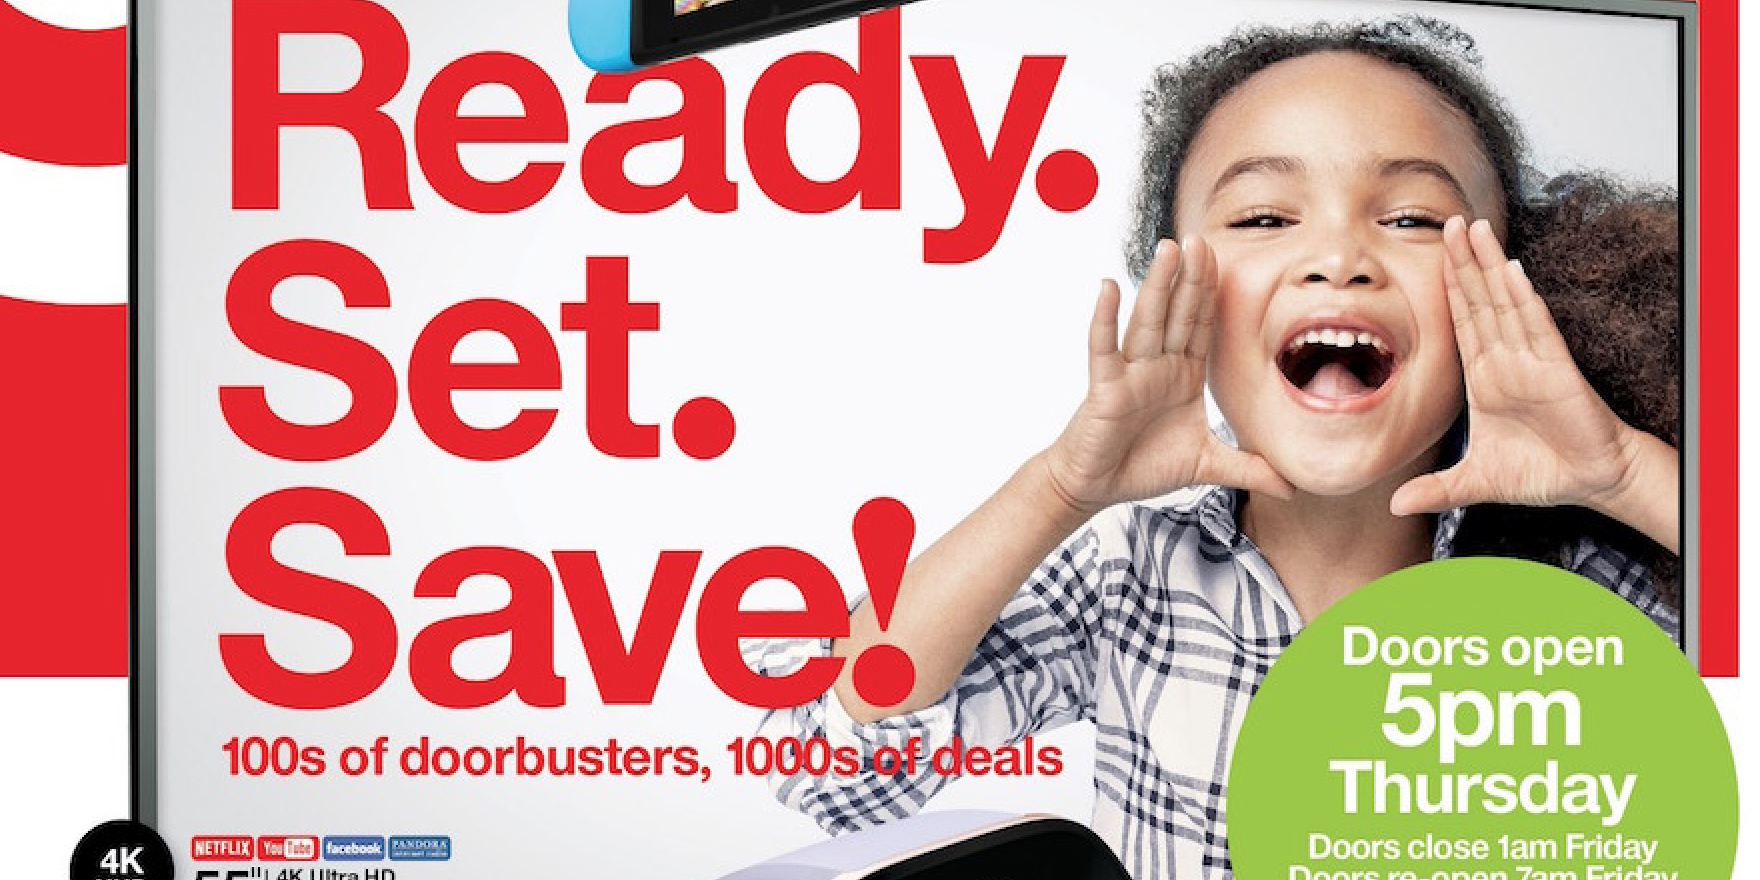 Target Black Friday ad includes notable Apple deals, more - 9to5Toys